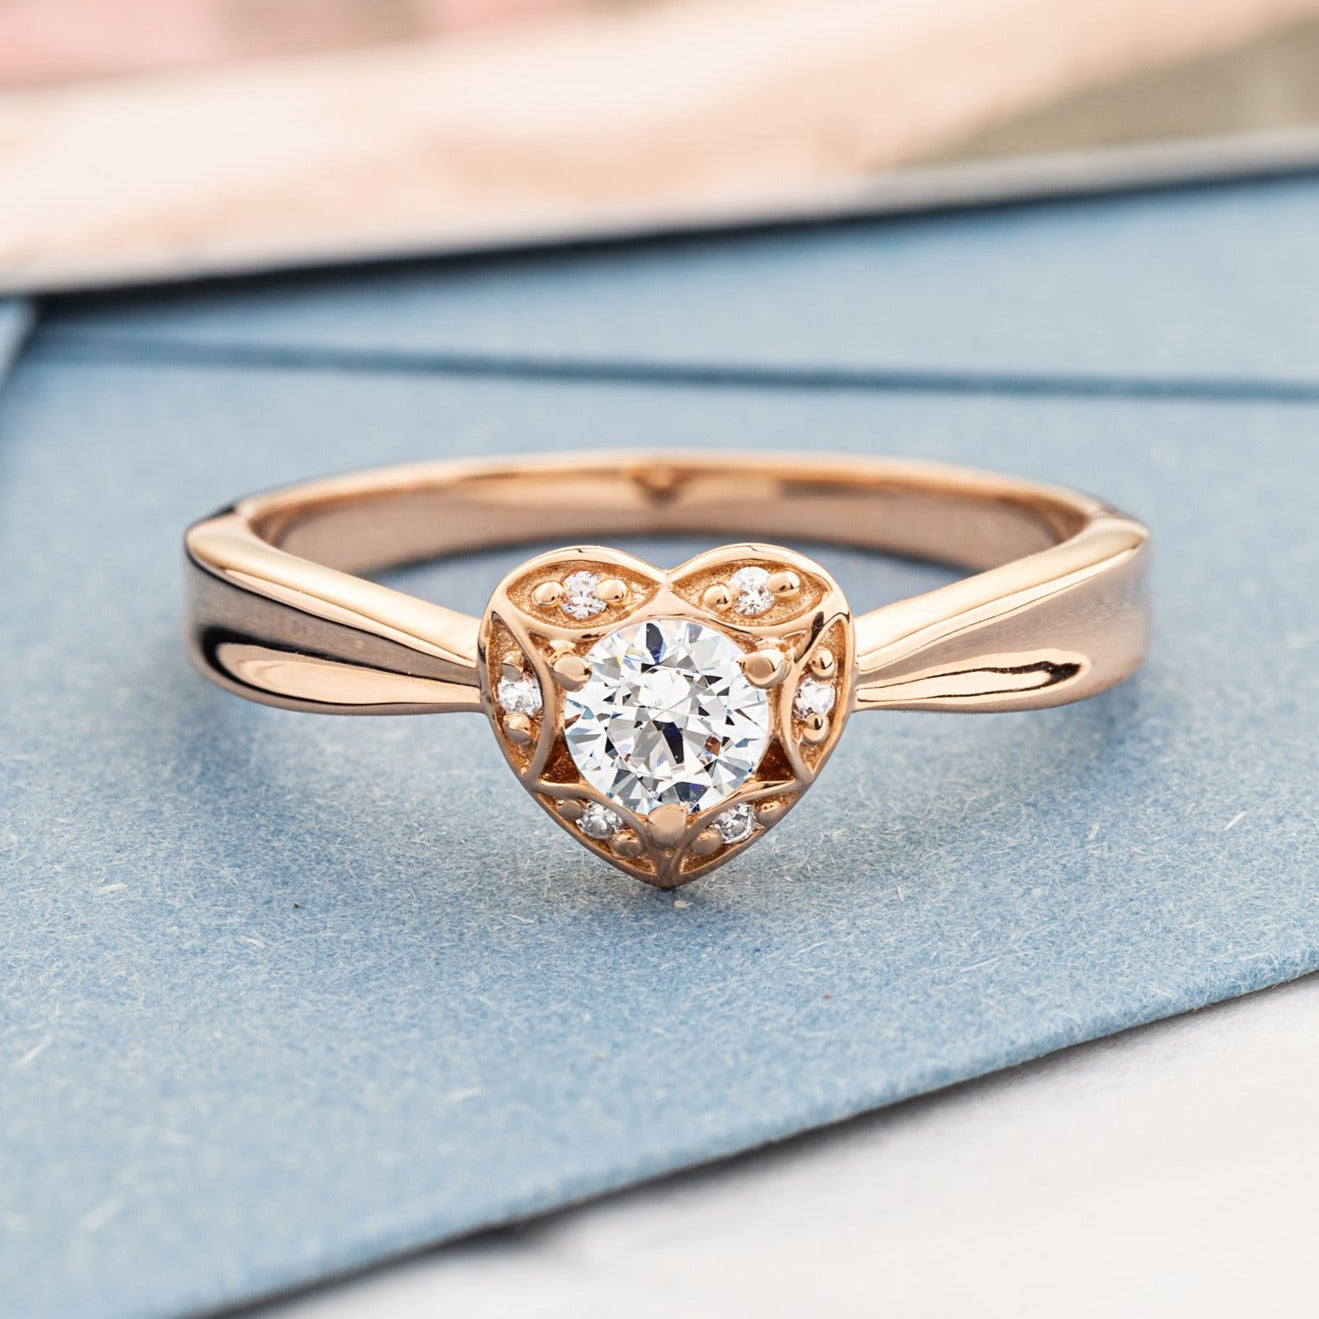 Heart shaped engagement ring with natural diamonds. Diamond engagement ring. Proposal ring. Anniversary ring. Gold diamond ring.Ring for her. Diamond proposal ring. Rose gold engagement ring. 